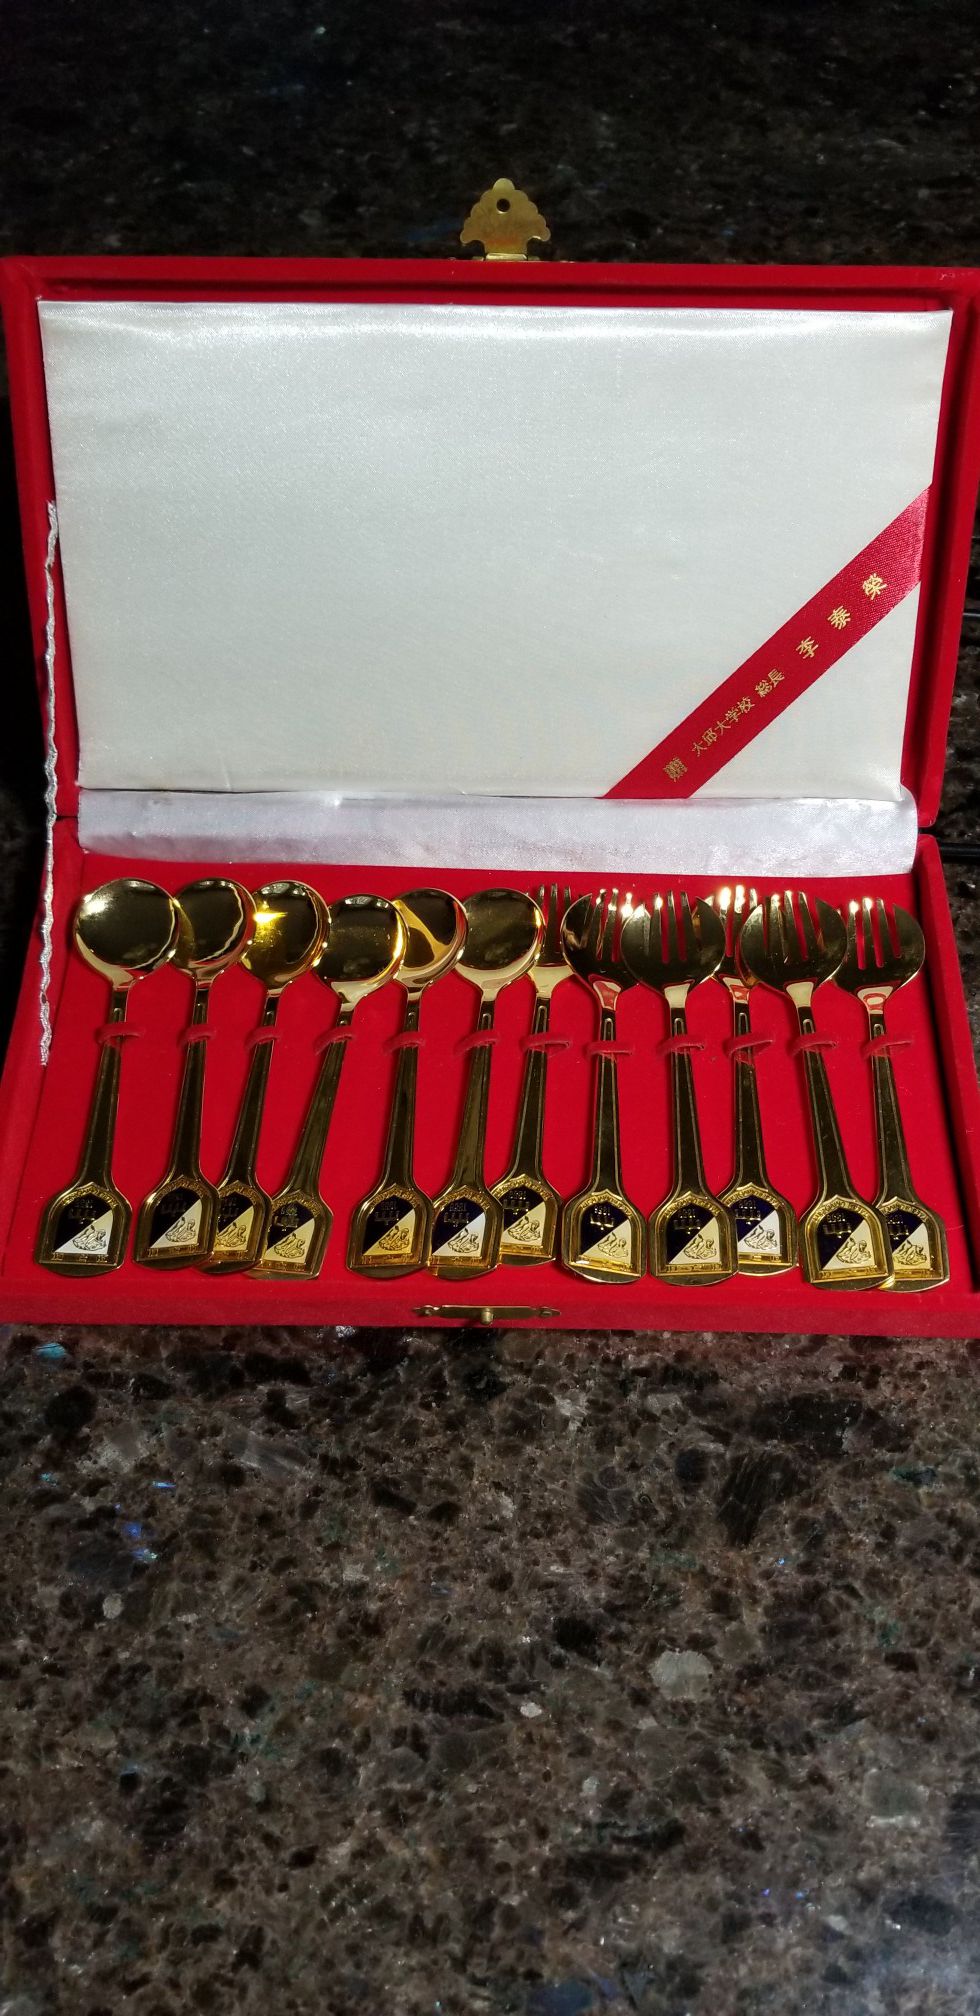 12 Piece Set Gold Plated Forks & Spoons